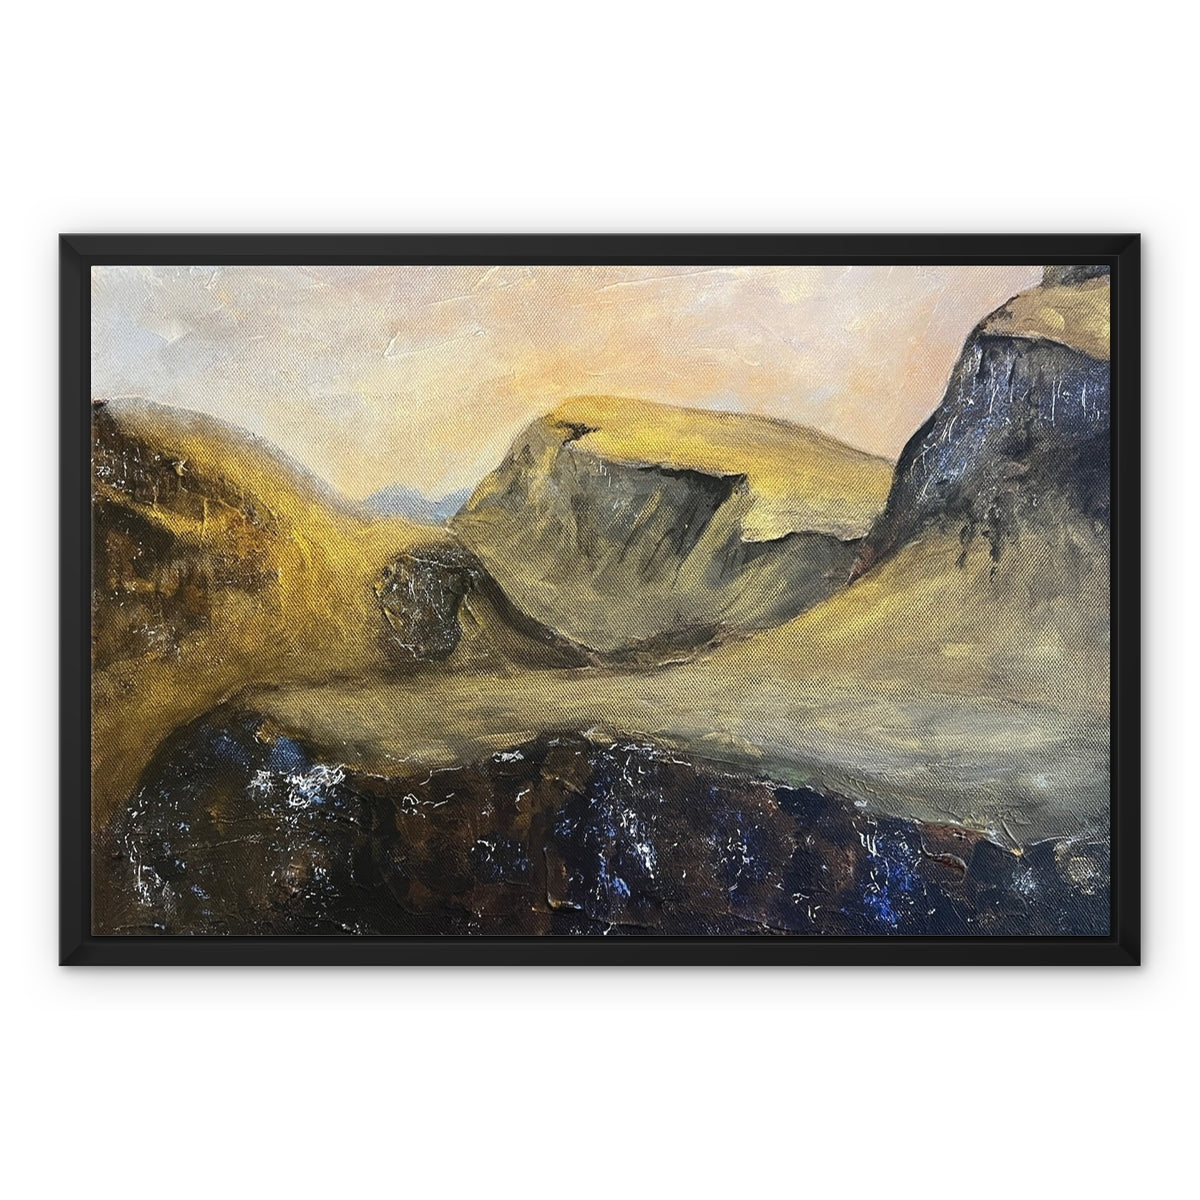 The Quiraing Skye Painting | Framed Canvas From Scotland-Floating Framed Canvas Prints-Skye Art Gallery-24"x18"-Black Frame-Paintings, Prints, Homeware, Art Gifts From Scotland By Scottish Artist Kevin Hunter